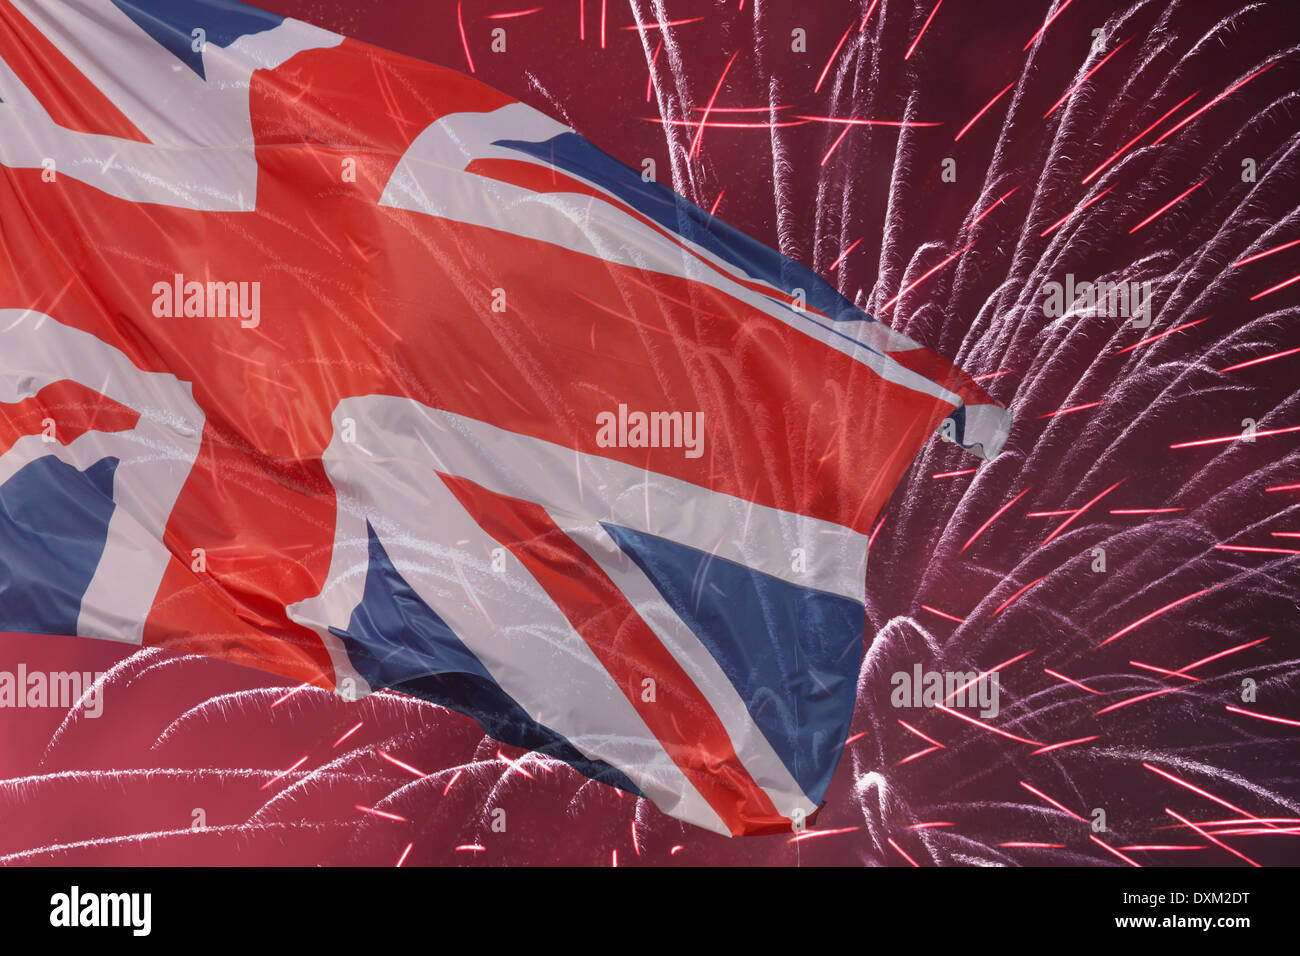 Great Britain flag over fireworks Stock Photo